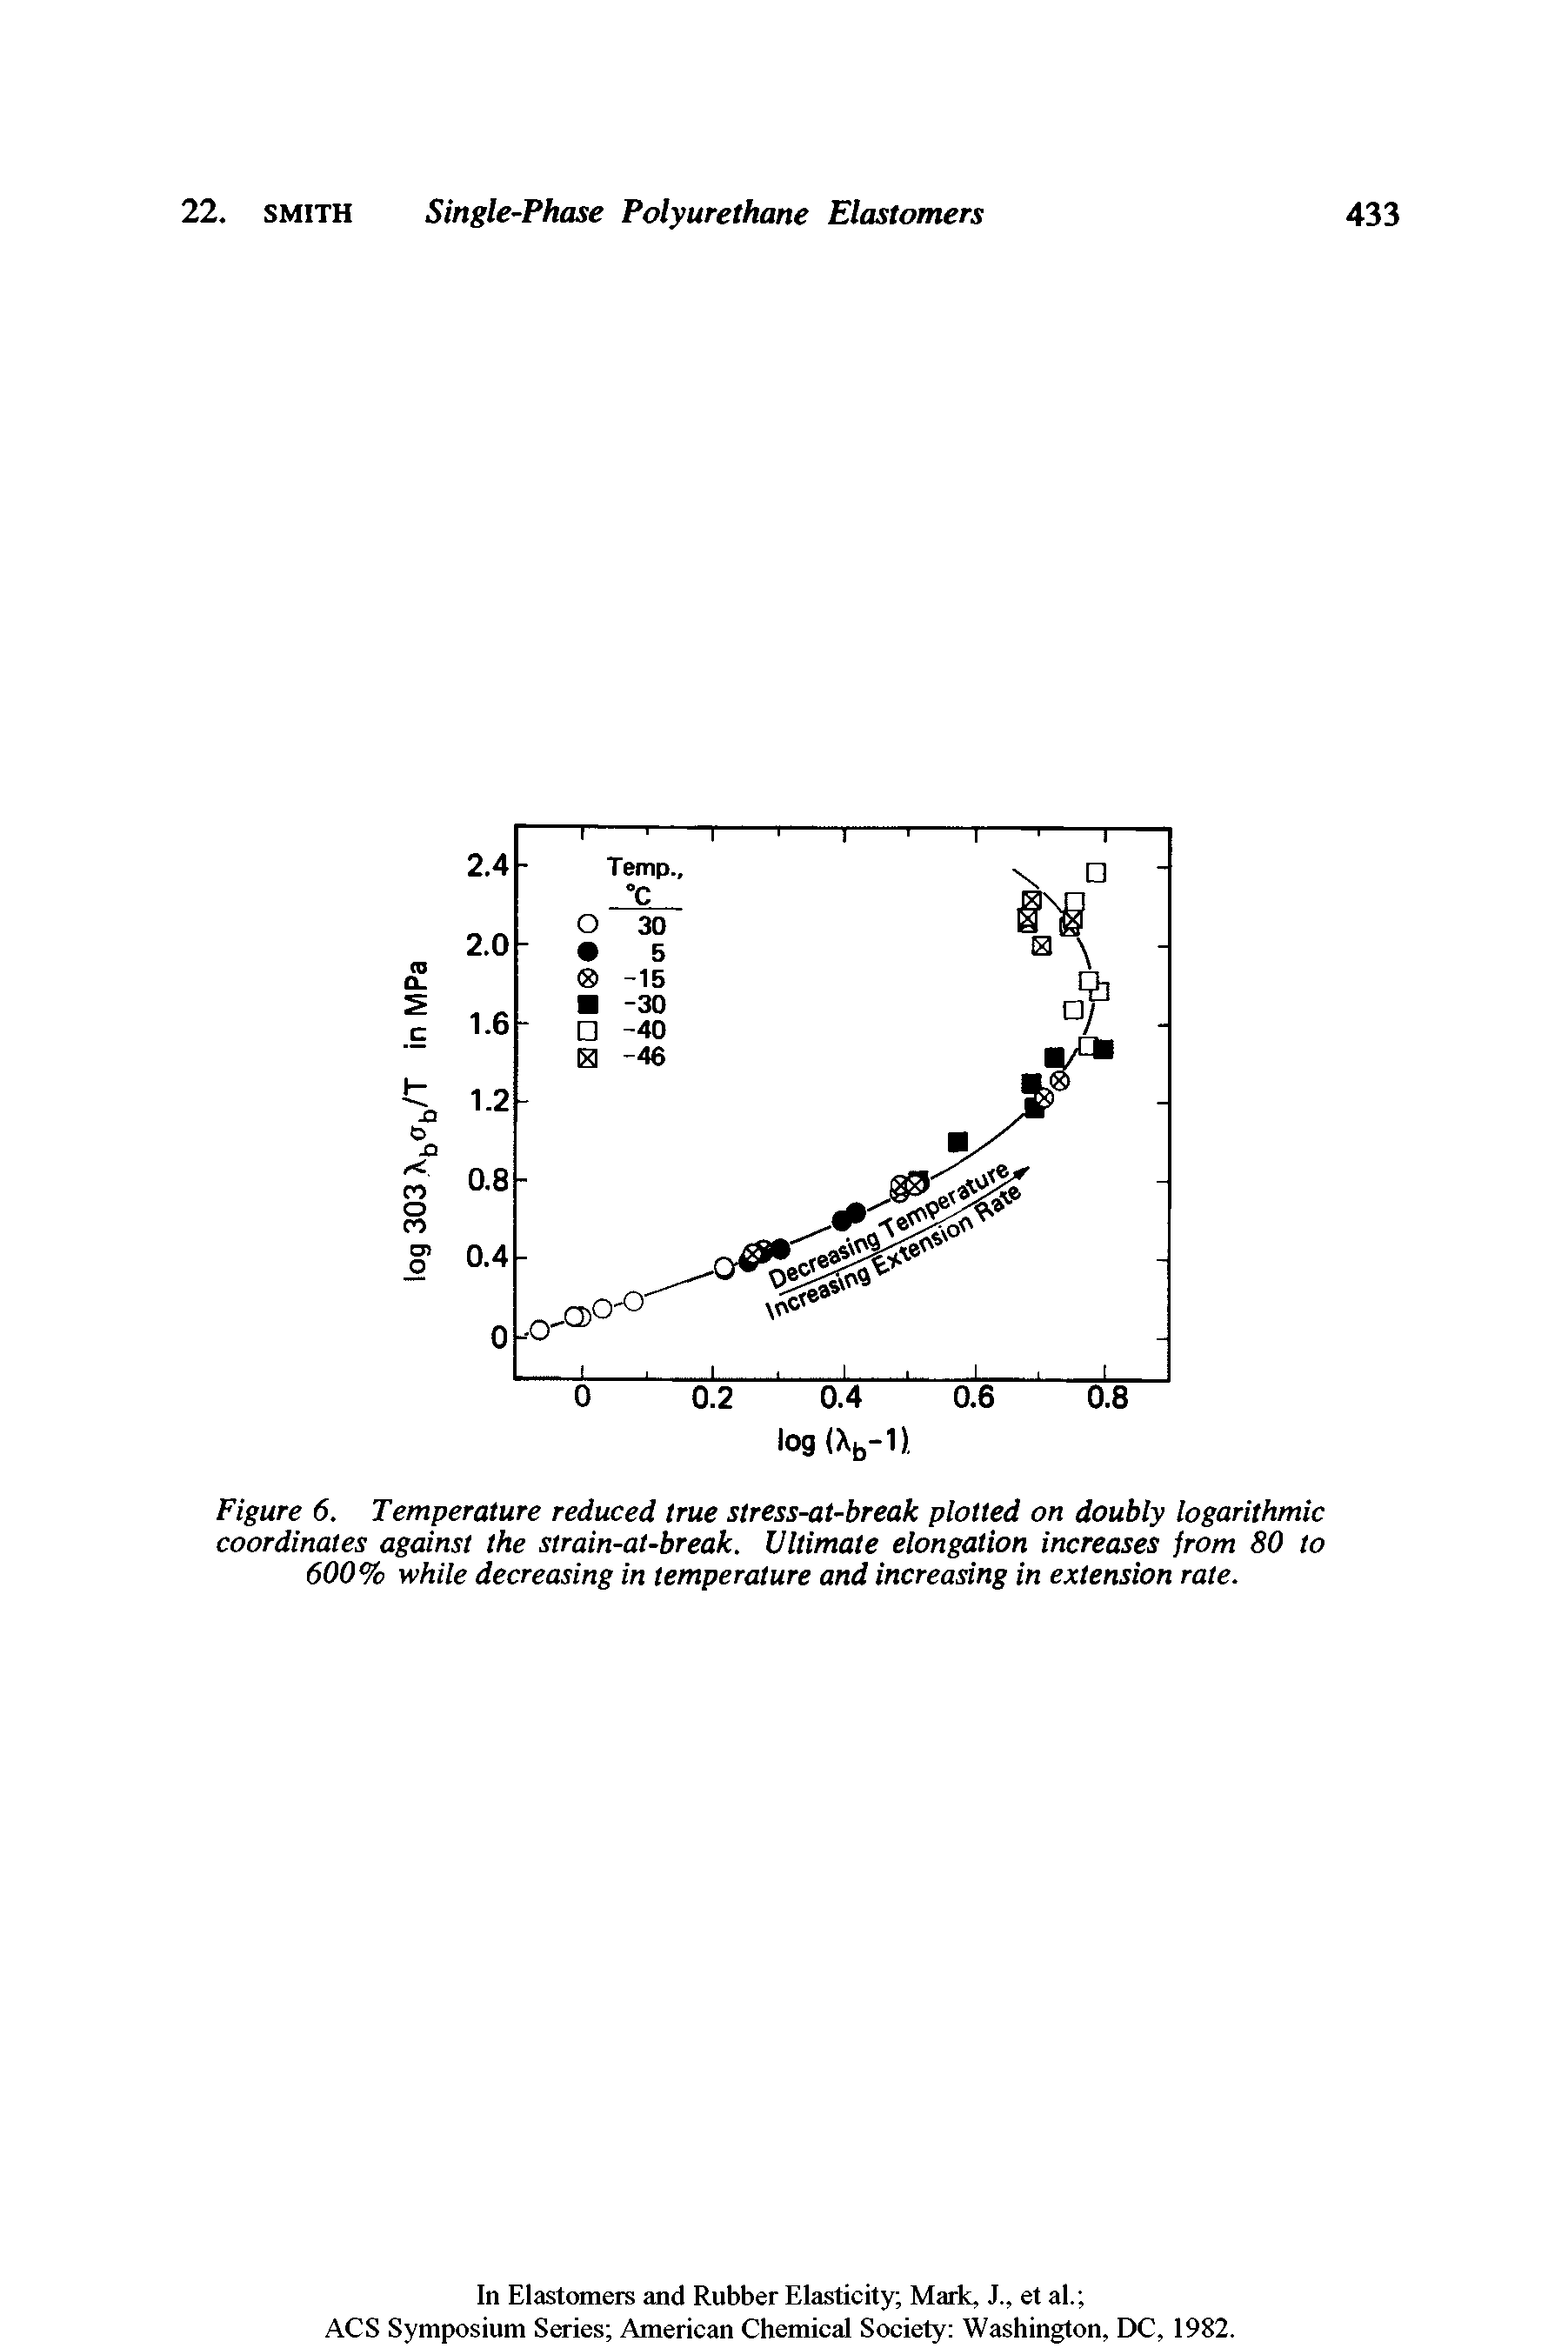 Figure 6. Temperature reduced true stress-at-break plotted on doubly logarithmic coordinates against the strain-at-break. Ultimate elongation increases from 80 to 600% while decreasing in temperature and increasing in extension rate.